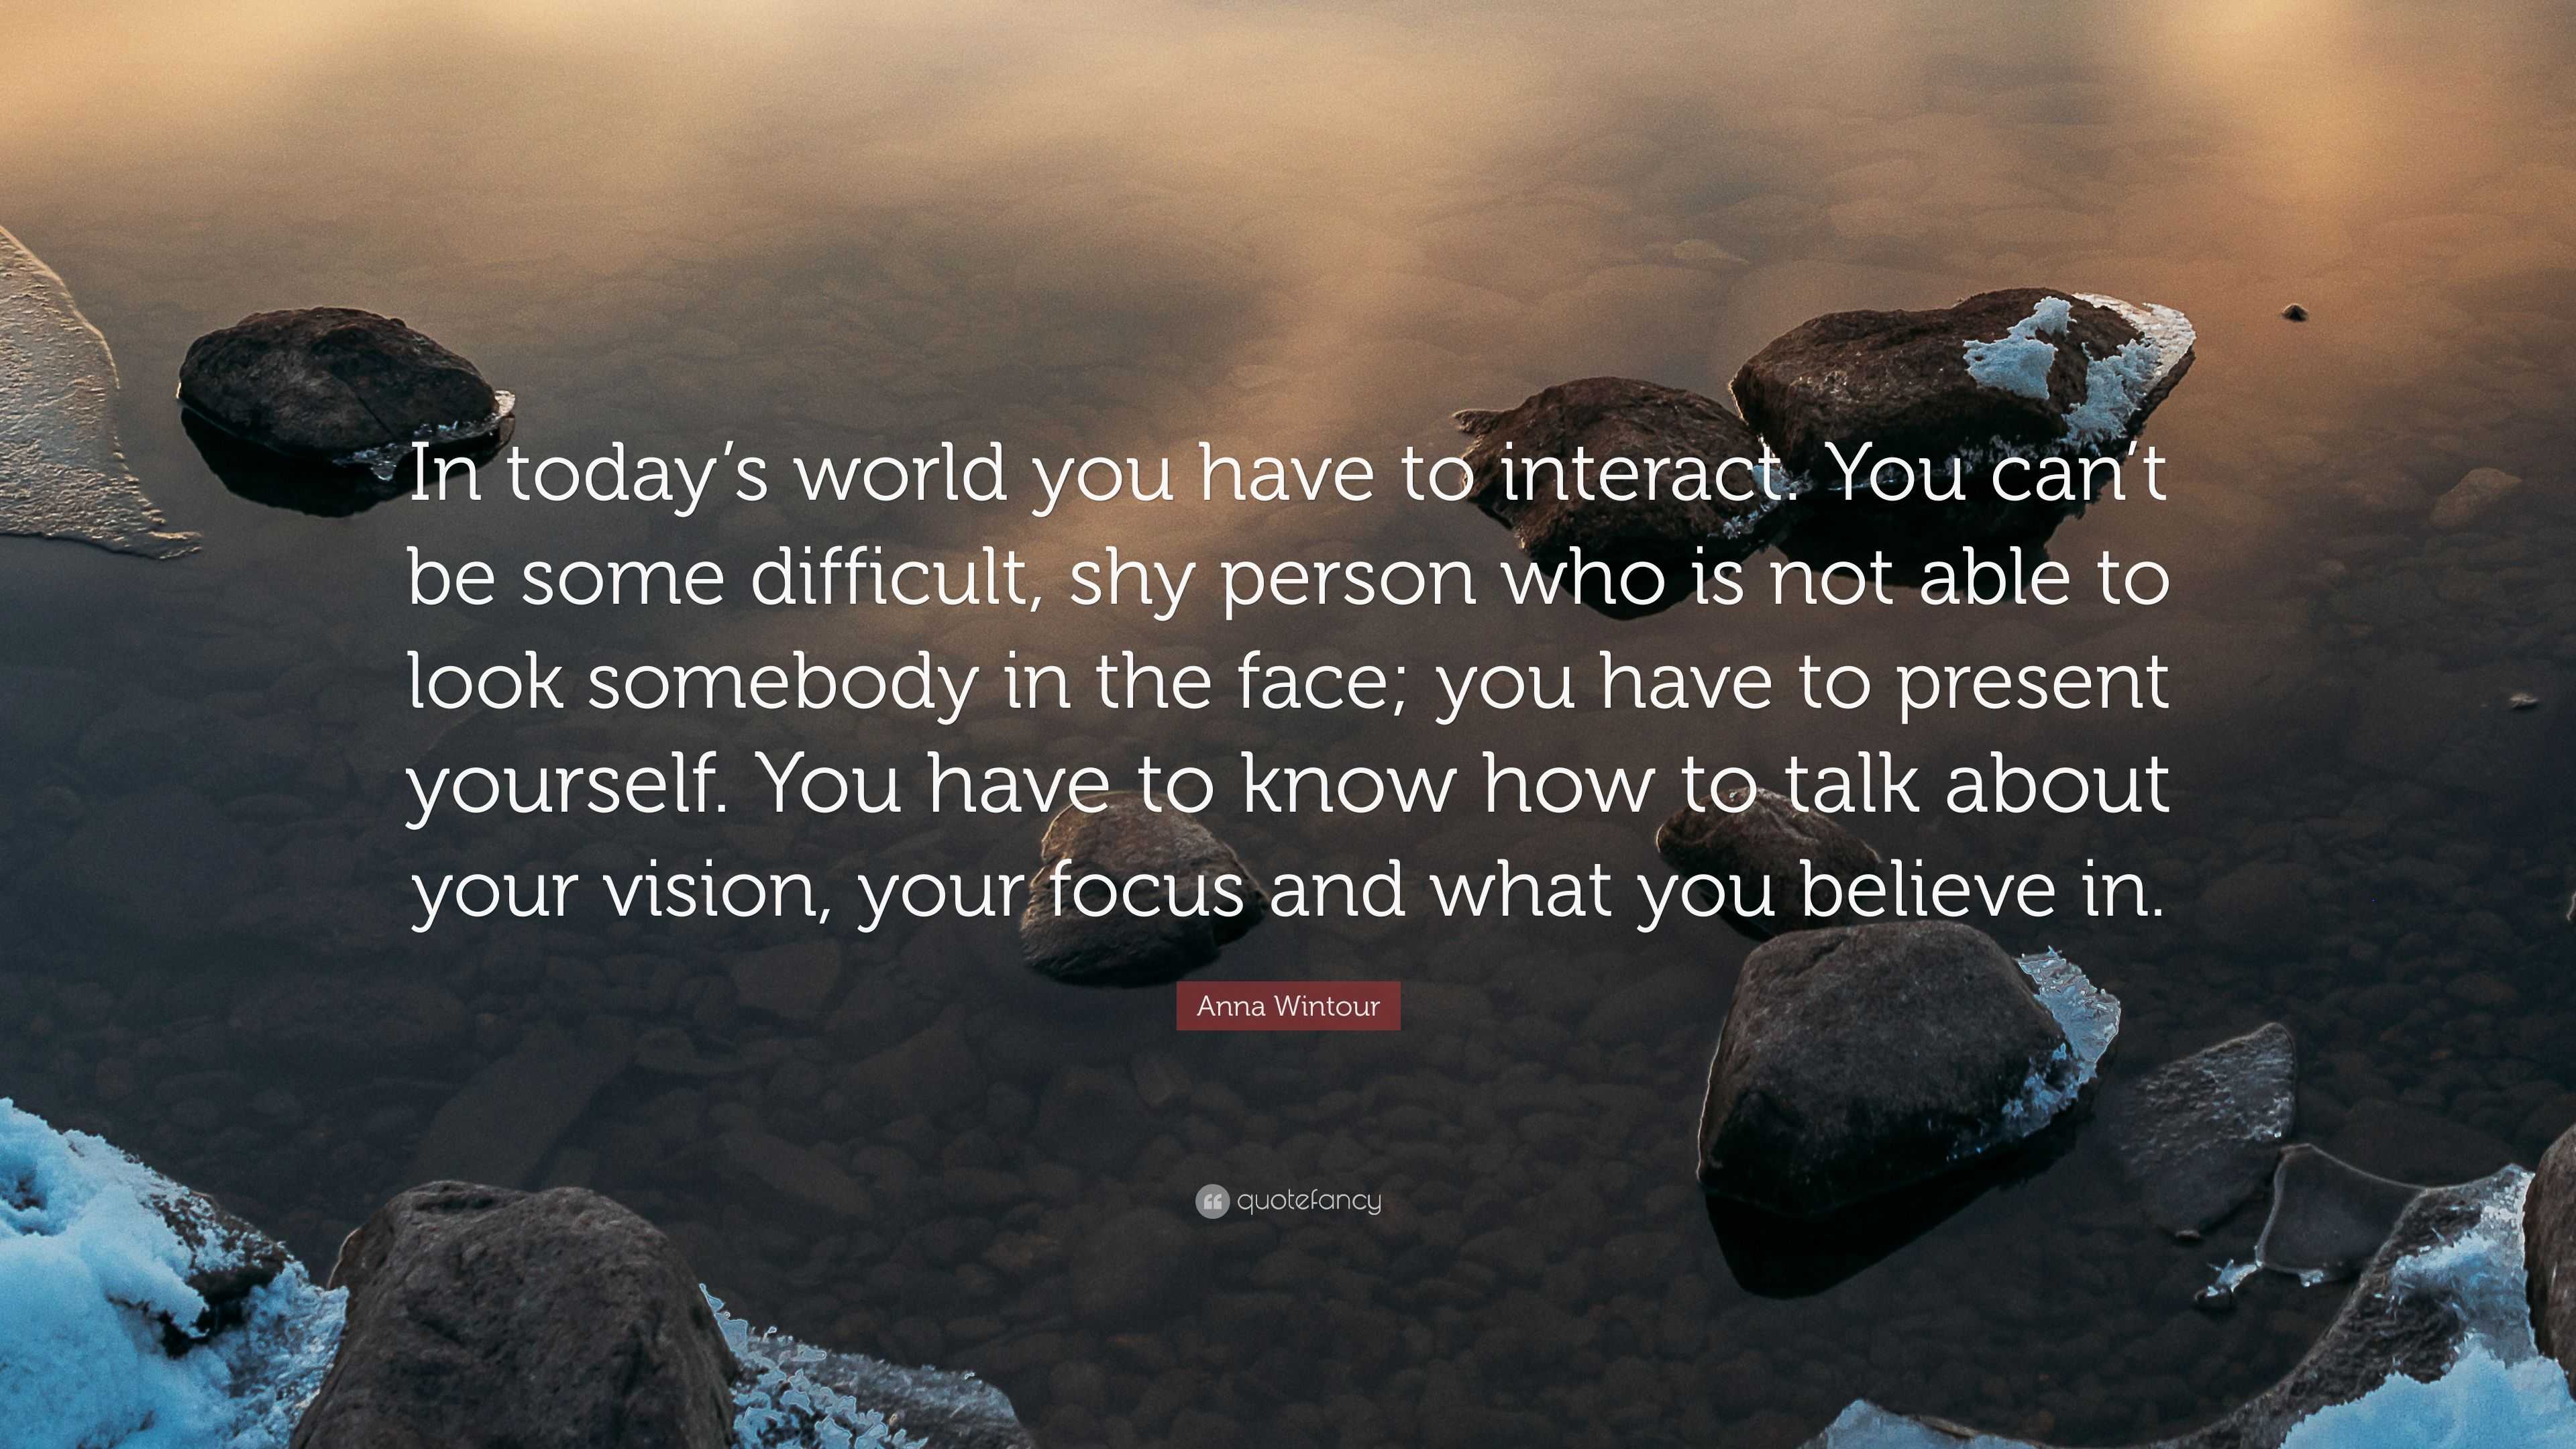 Anna Wintour Quote: “In today’s world you have to interact. You can’t ...